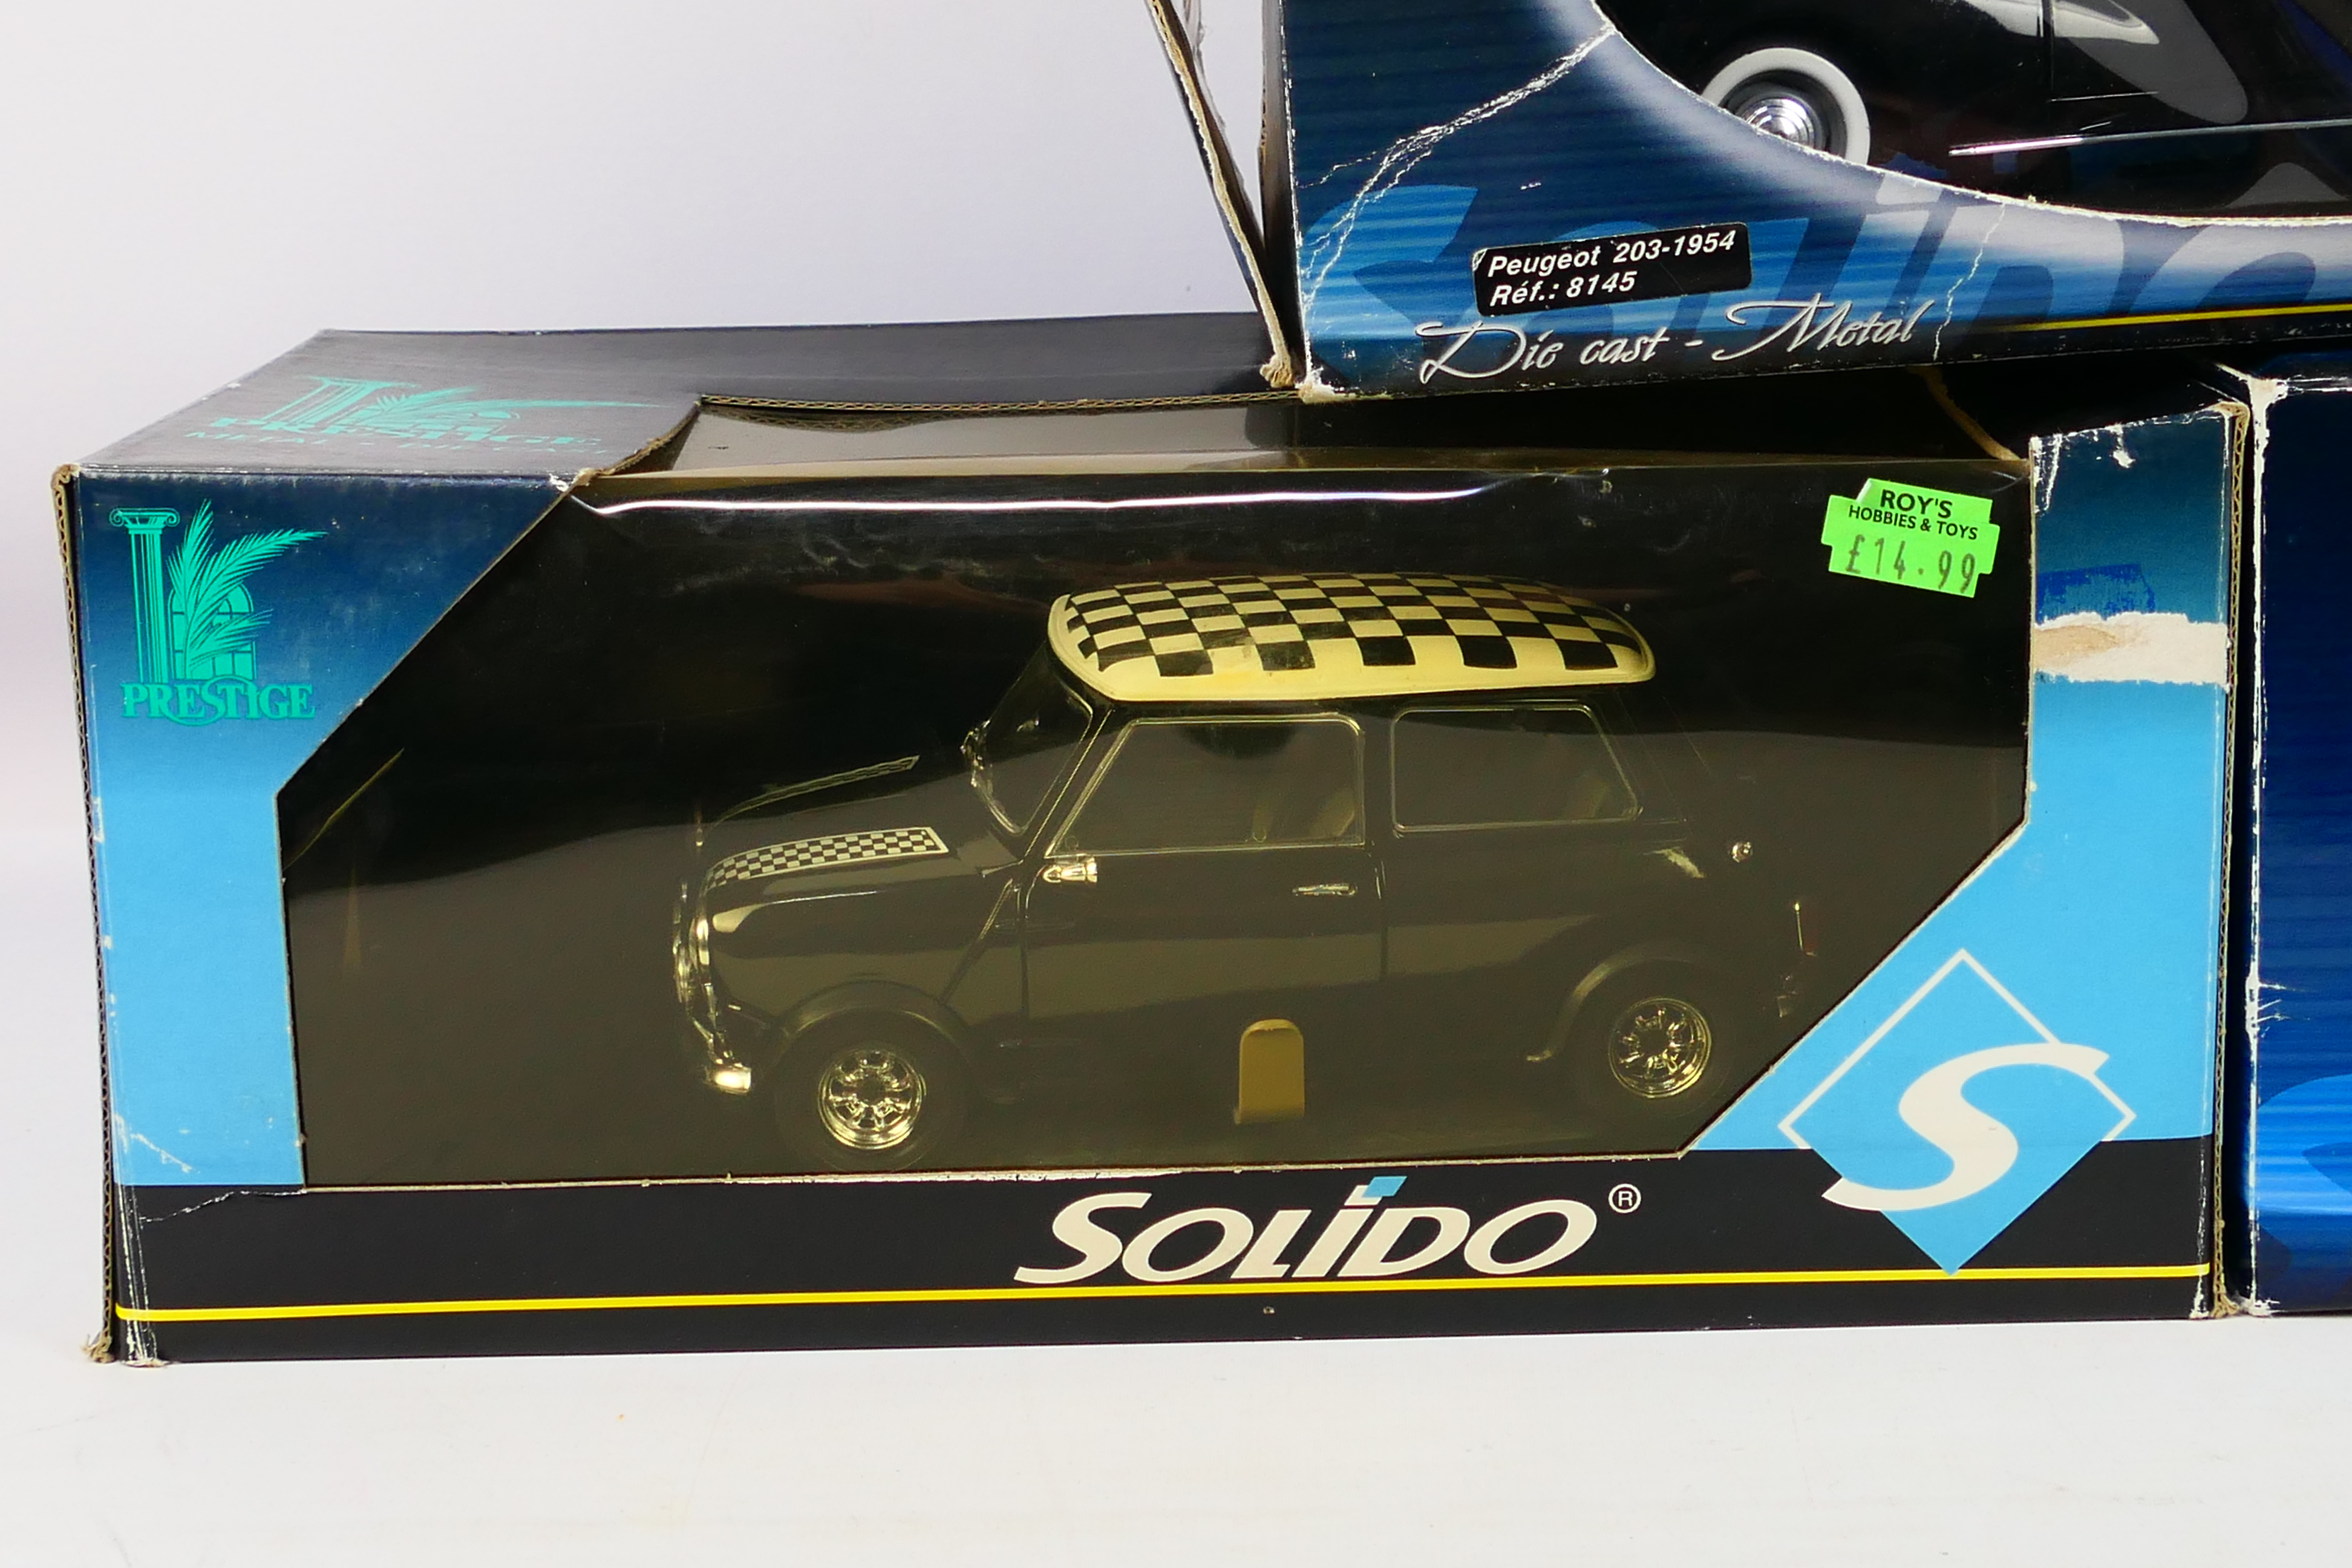 Solido - Three boxed 1:18 scale diecast model cars by Solido, - Image 2 of 4